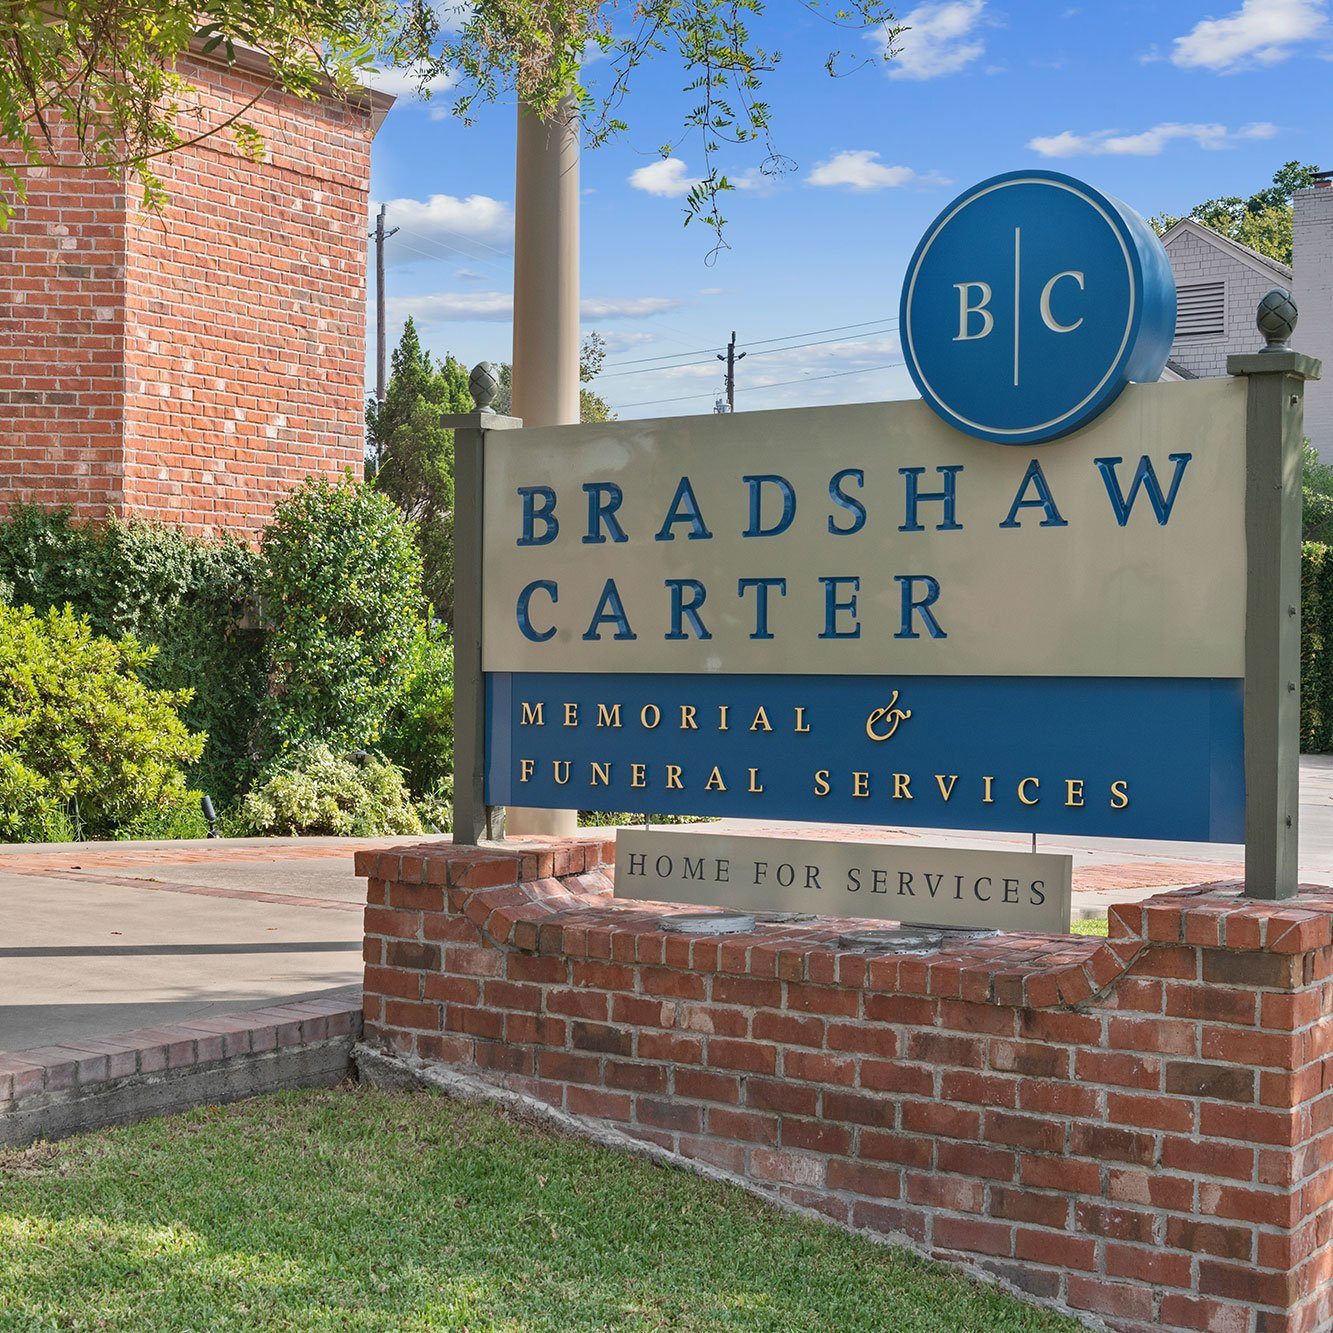 Bradshaw Carter monument sign | Carriage Funeral Services